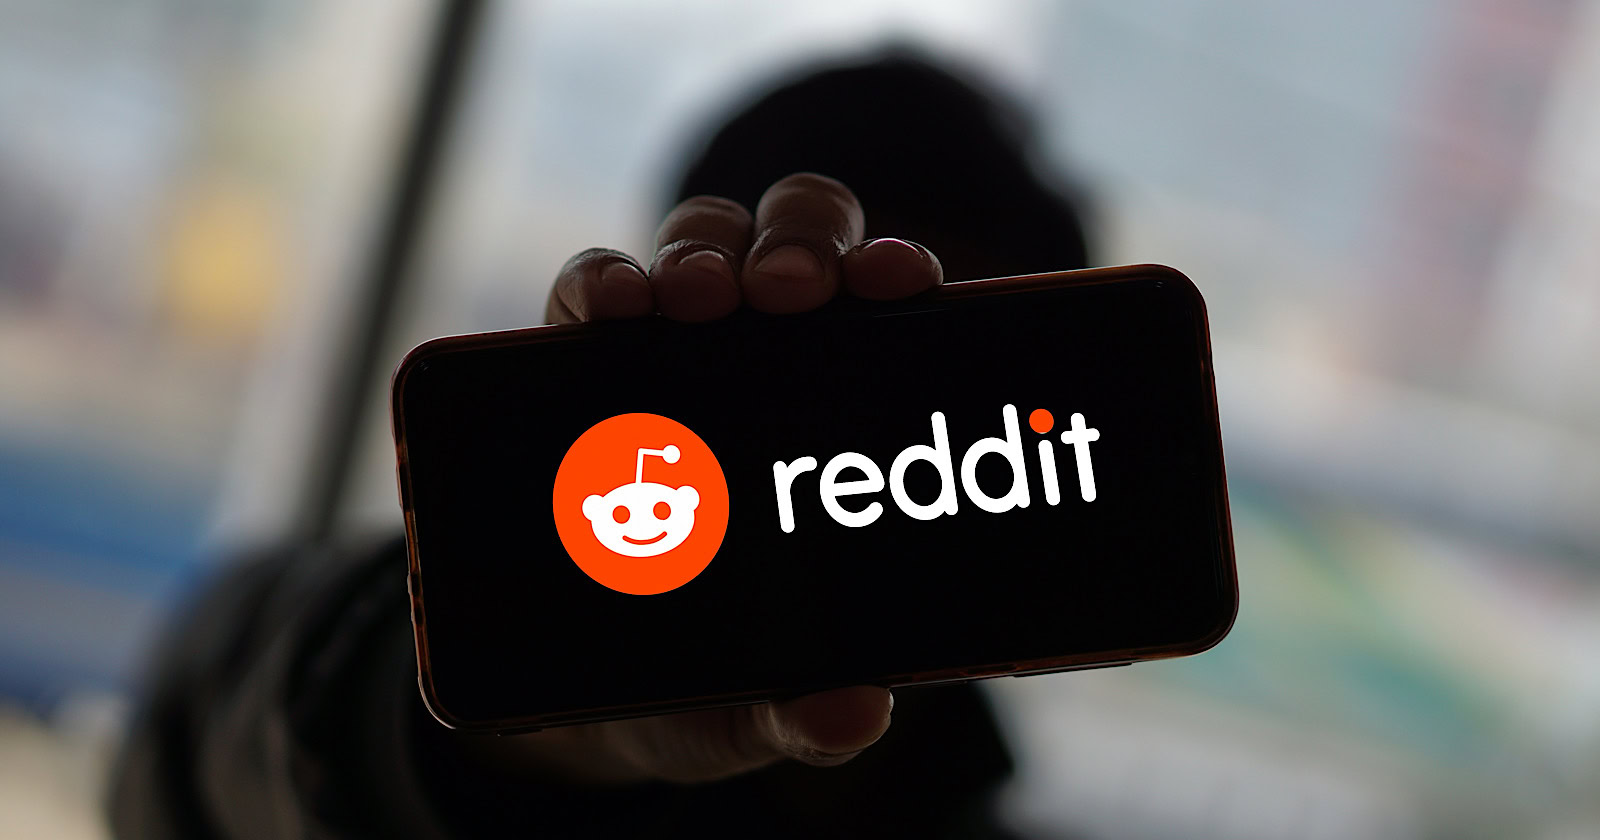 Reddit Limits Search Engine Access, Google Remains Exception via @sejournal, @MattGSouthern